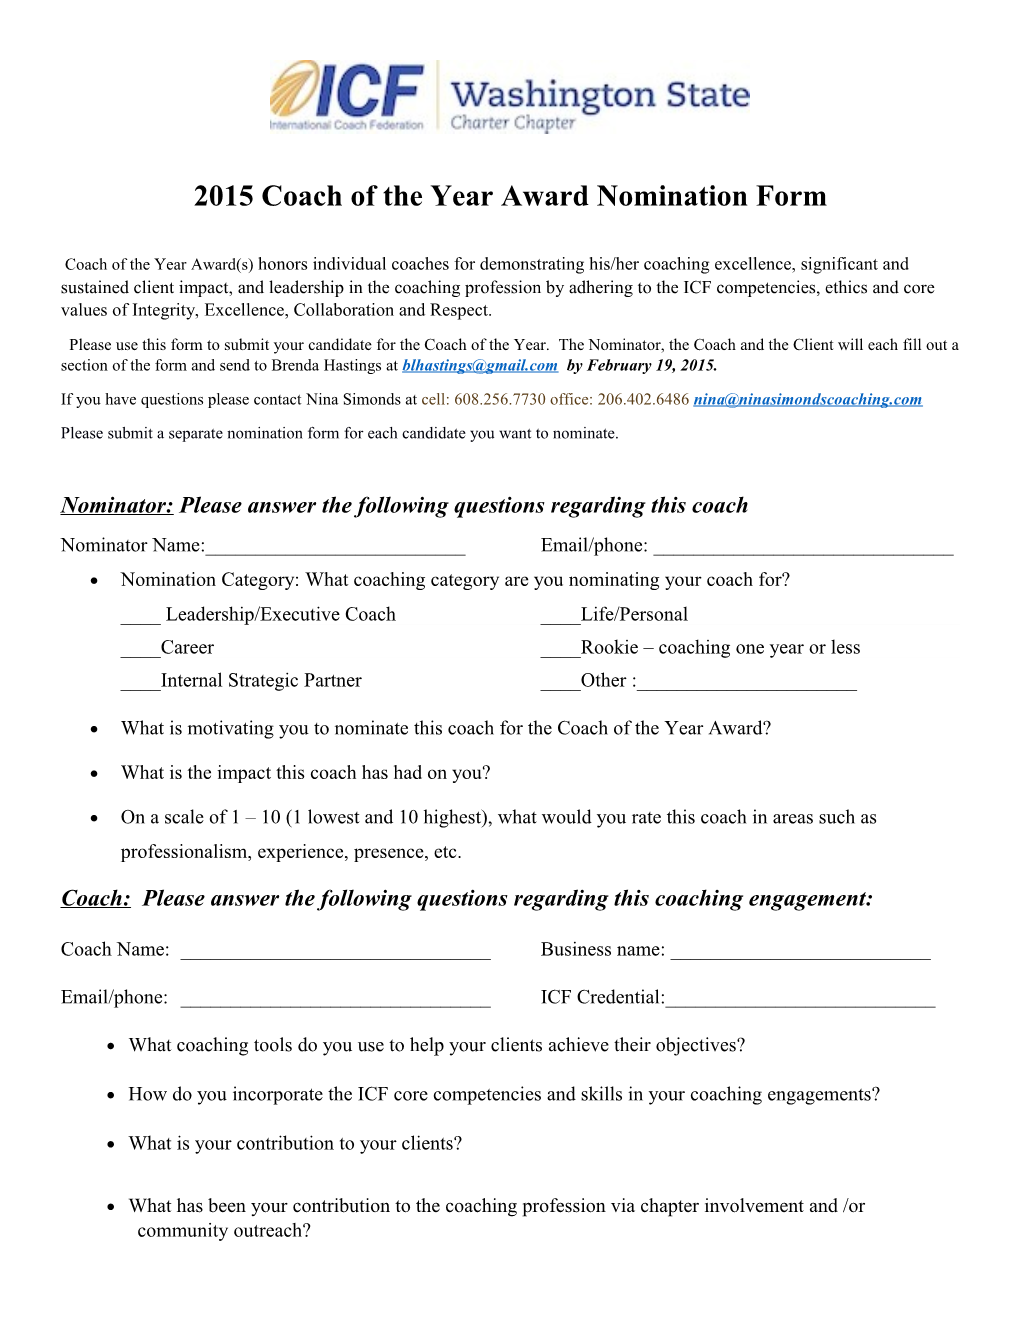 2015 Coach of the Year Awardnomination Form